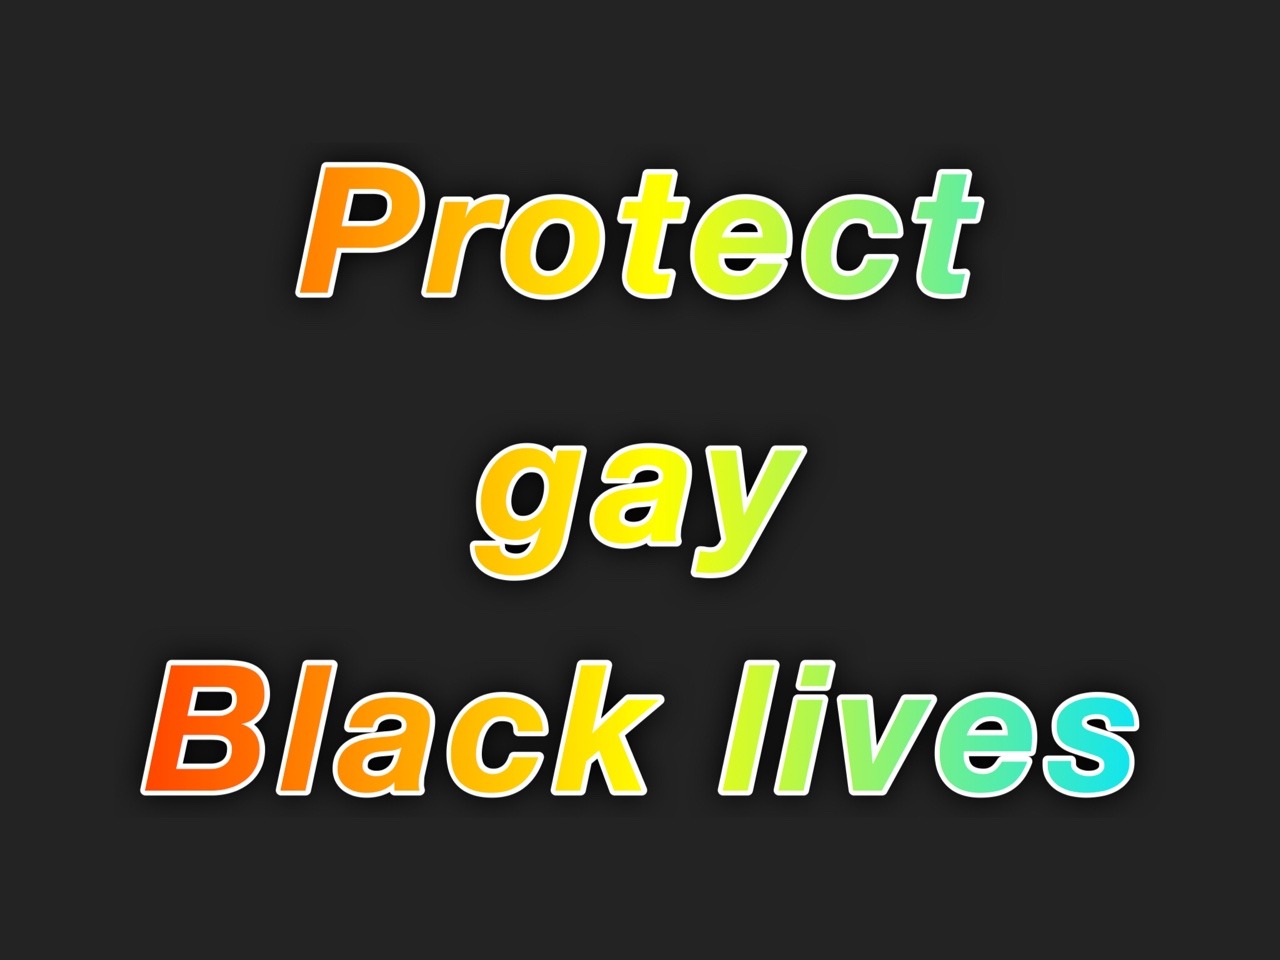 transkidpride:  (starting from the top left,) [[Protect gay Black lives]][[Protect